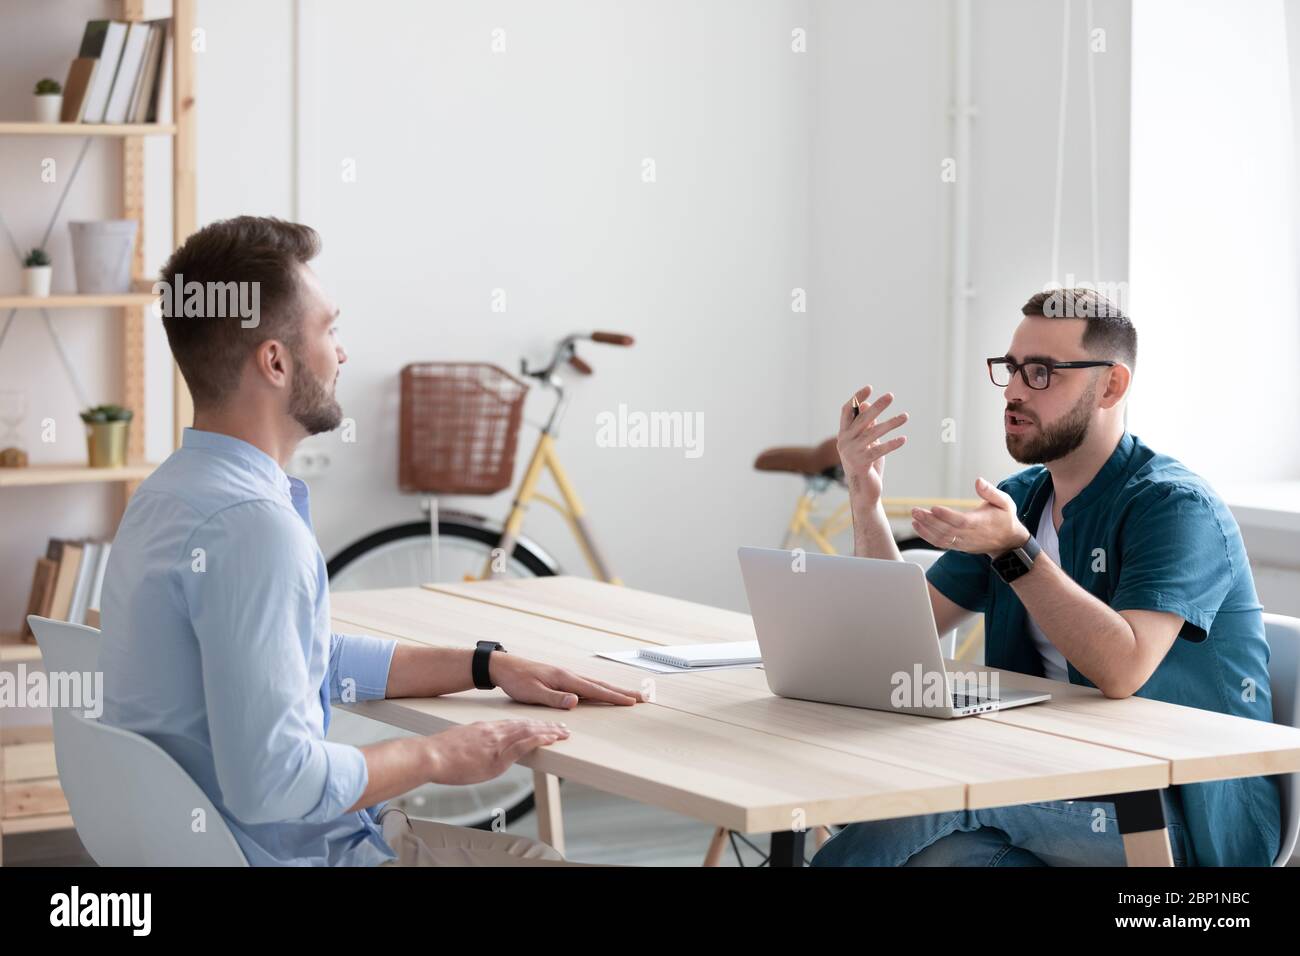 Serious bearded businessman talking and interviews new male applicant. Stock Photo